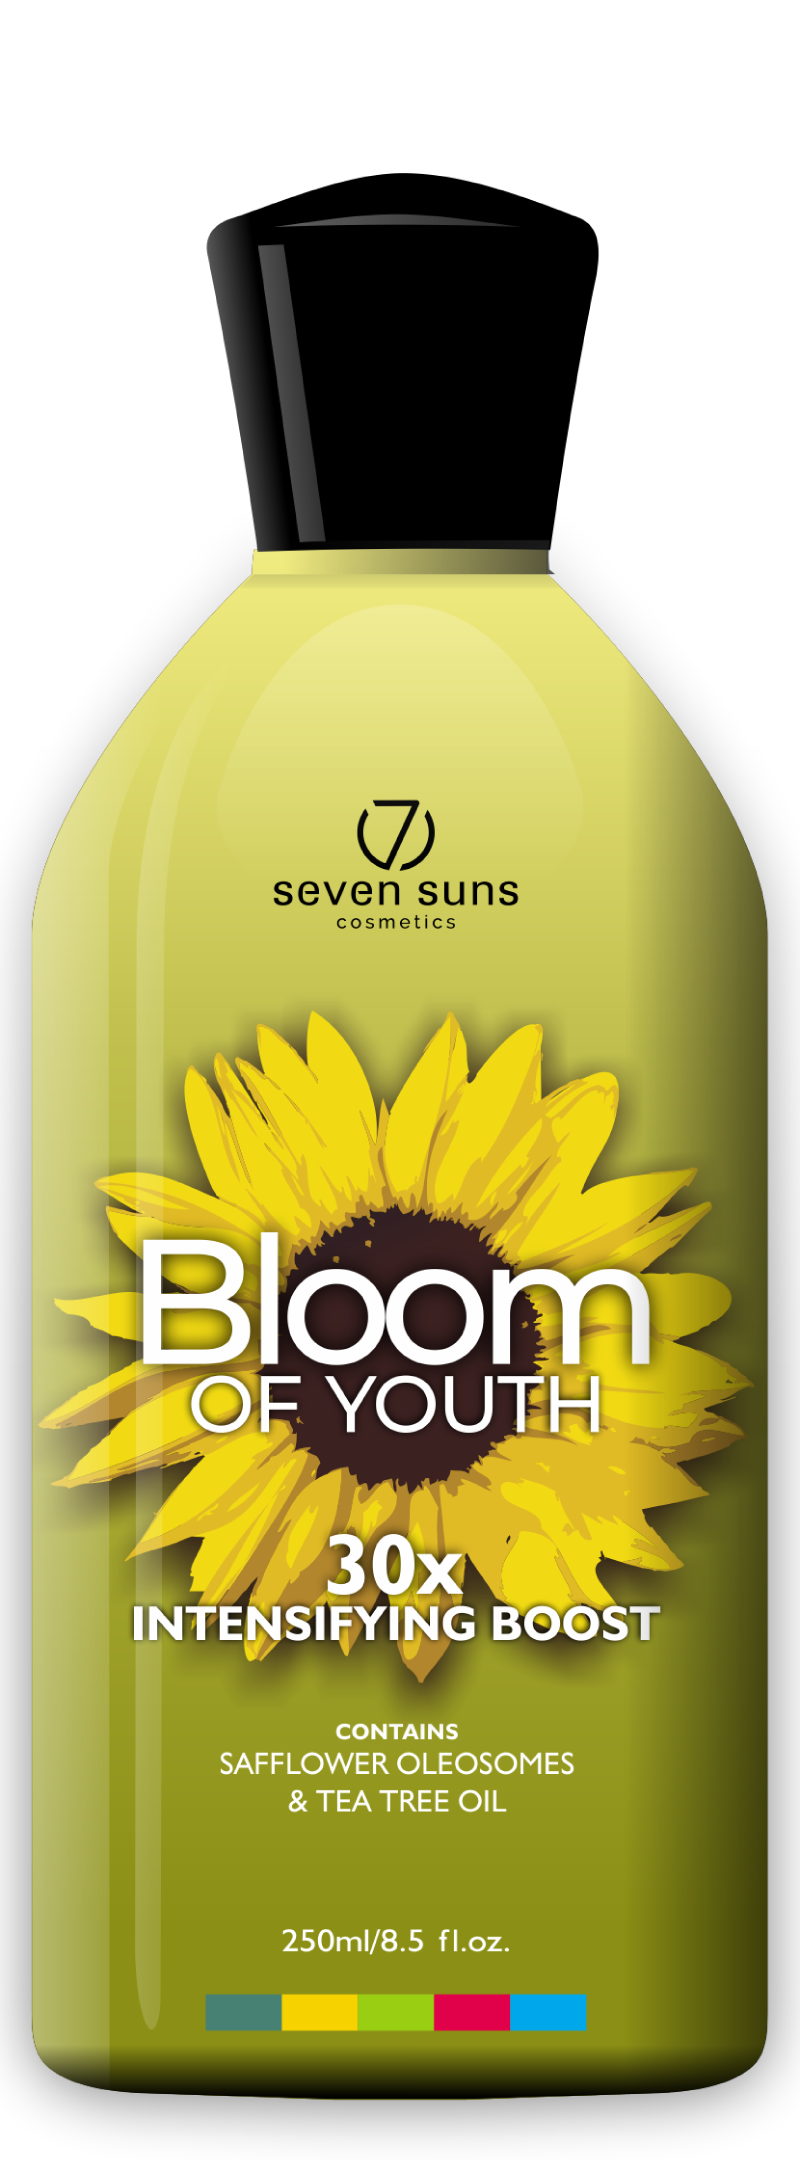 Bloom of Youth cosmetic bottle